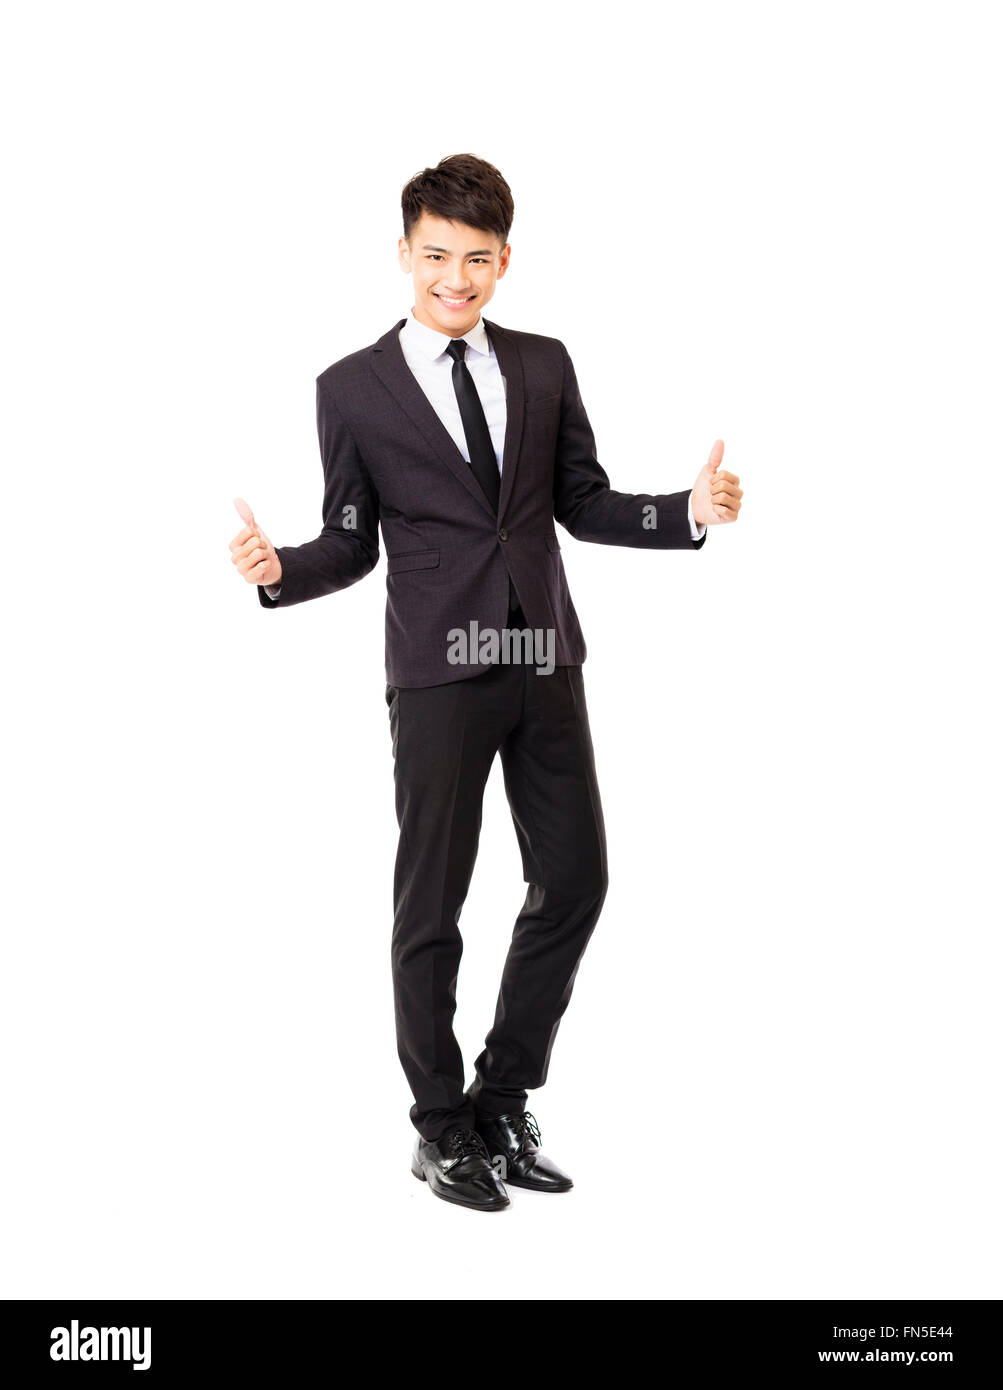 happy  young business man with successful gesture Stock Photo